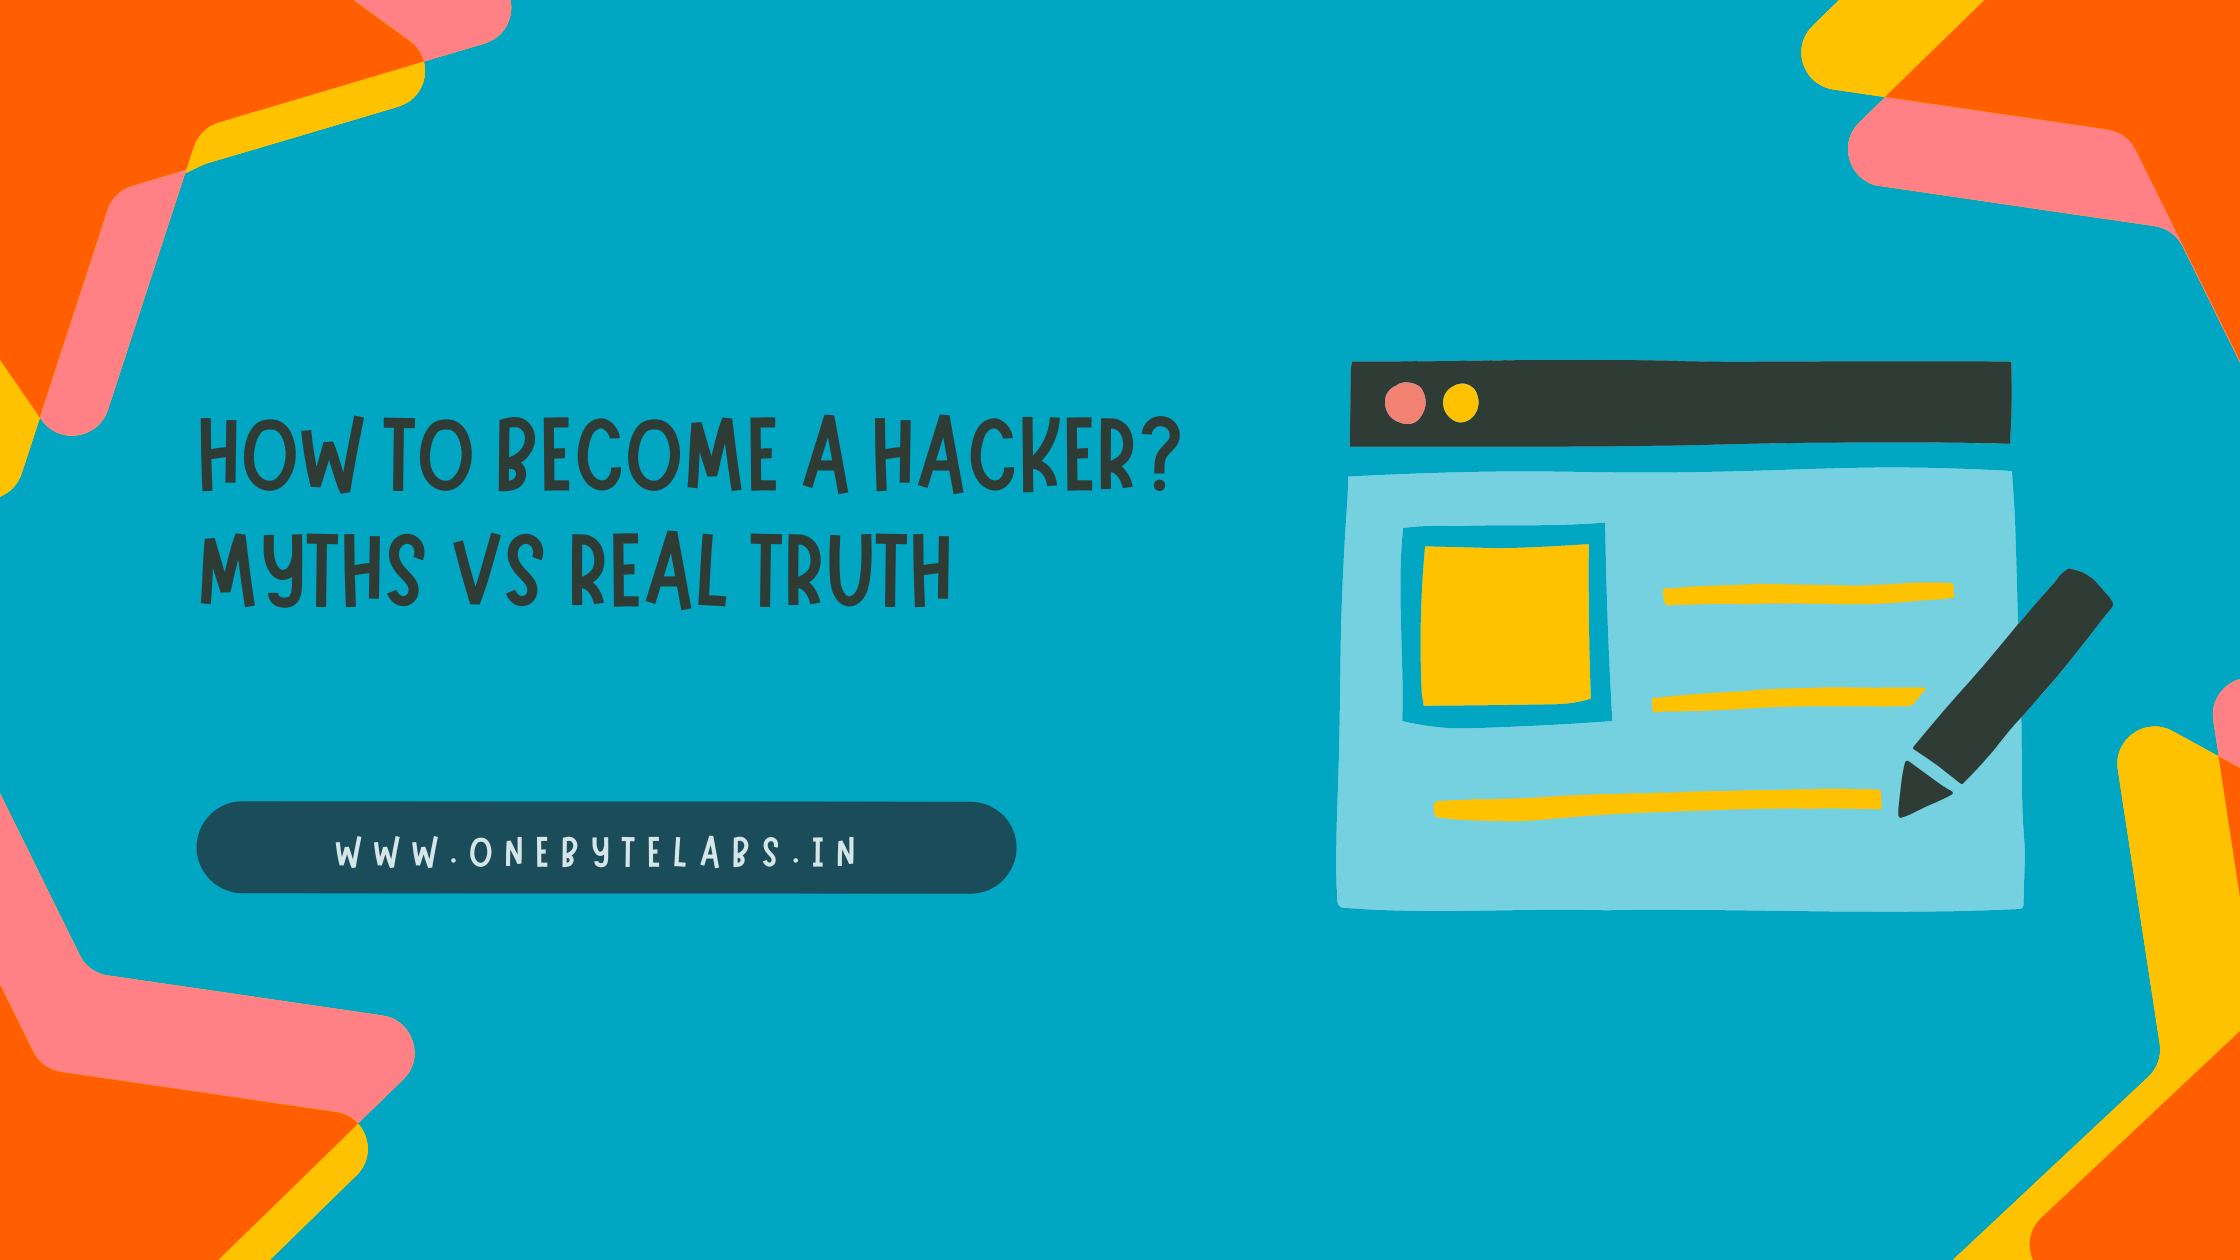 How to Become a Hacker? Myths Vs Real Truth